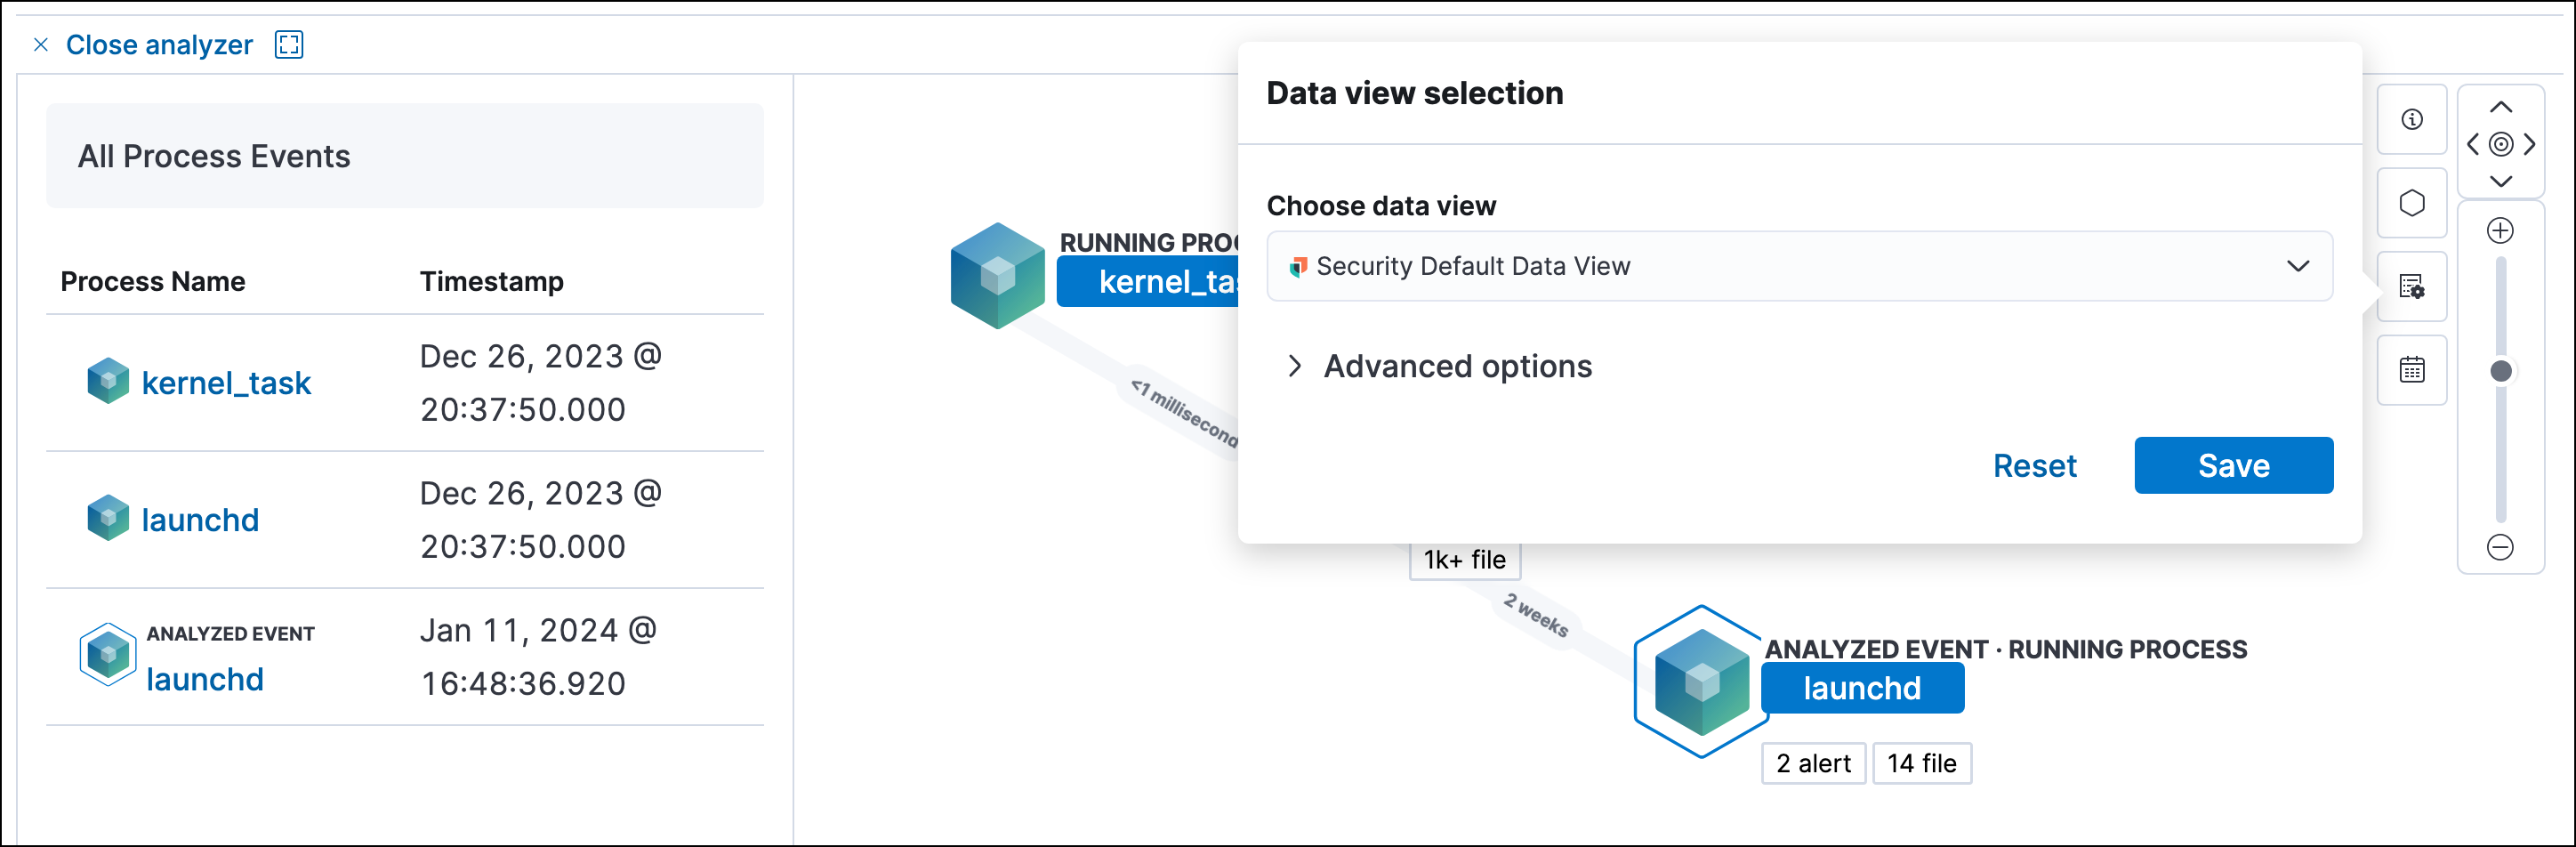 The data view selector